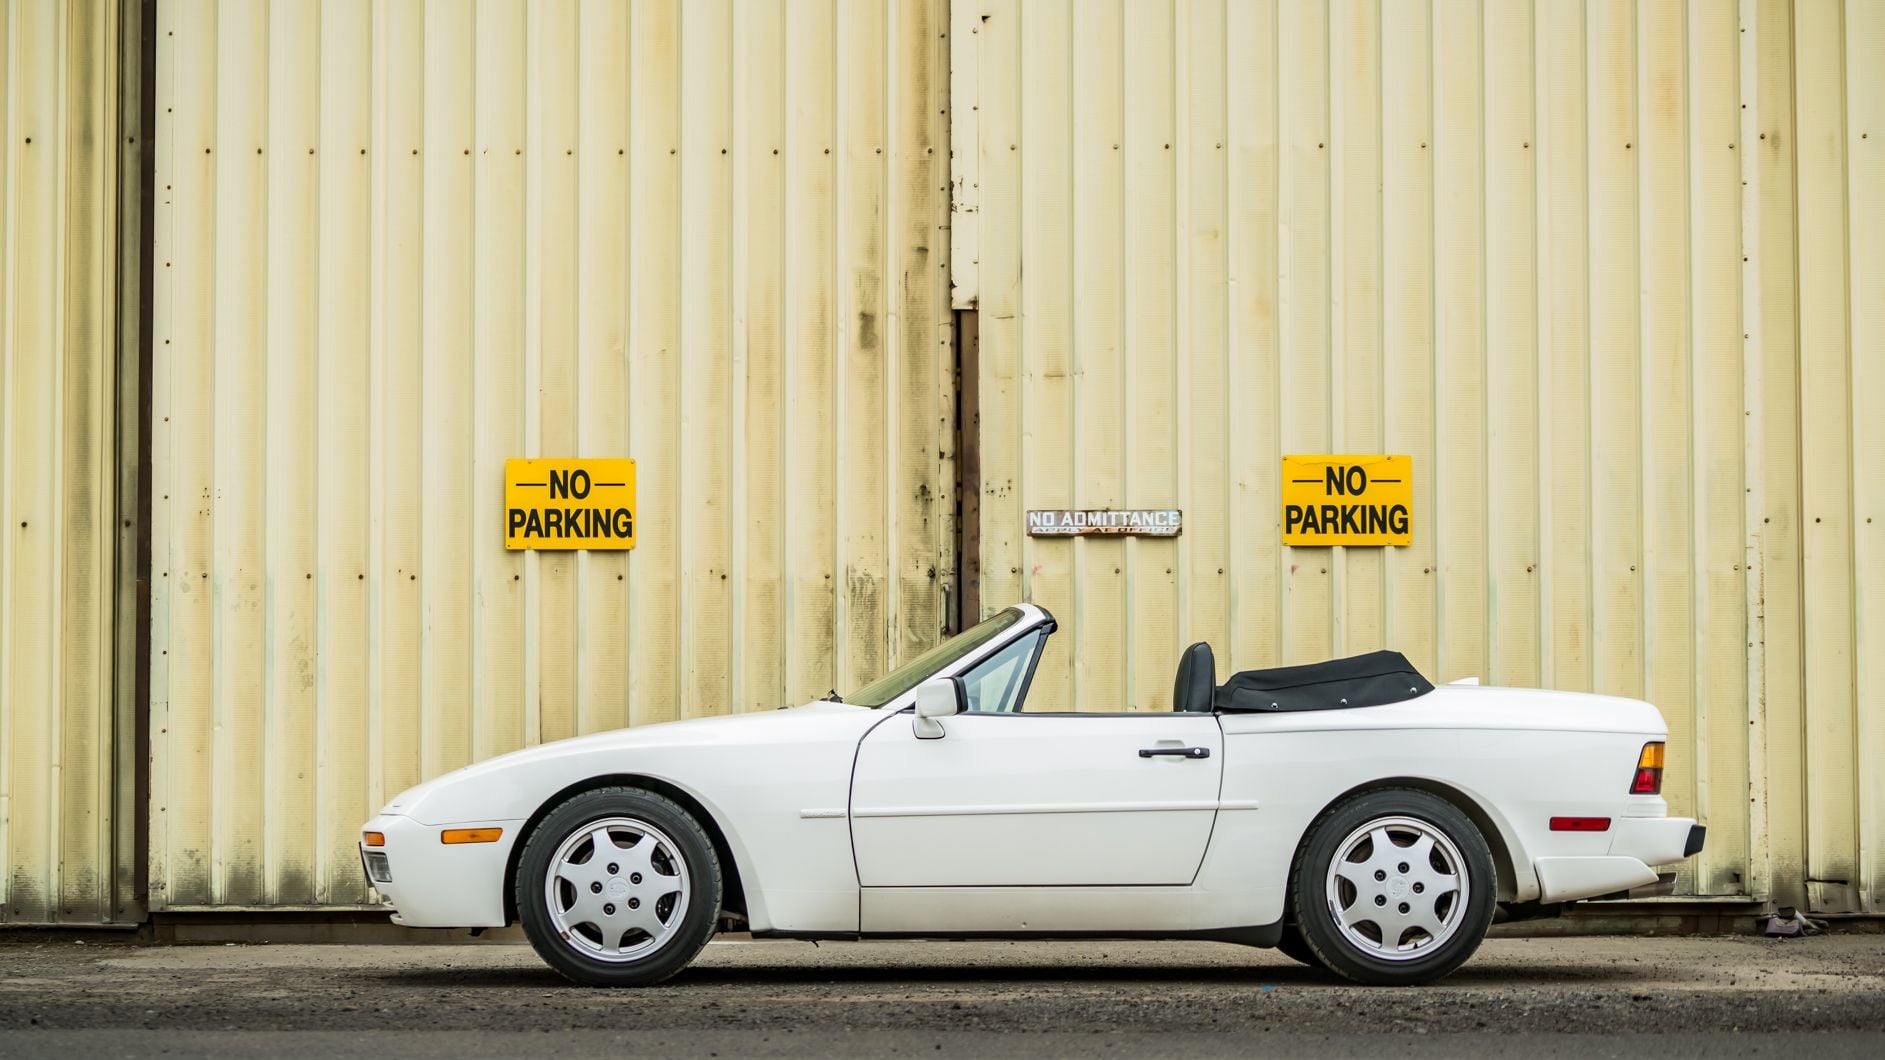 1990 Porsche 944 - 1990 Porsche 944 S2 Cabriolet 5-Speed - Used - VIN WP0CB2946LN480190 - 78,800 Miles - 4 cyl - 2WD - Manual - Convertible - White - Portland, OR 97227, United States